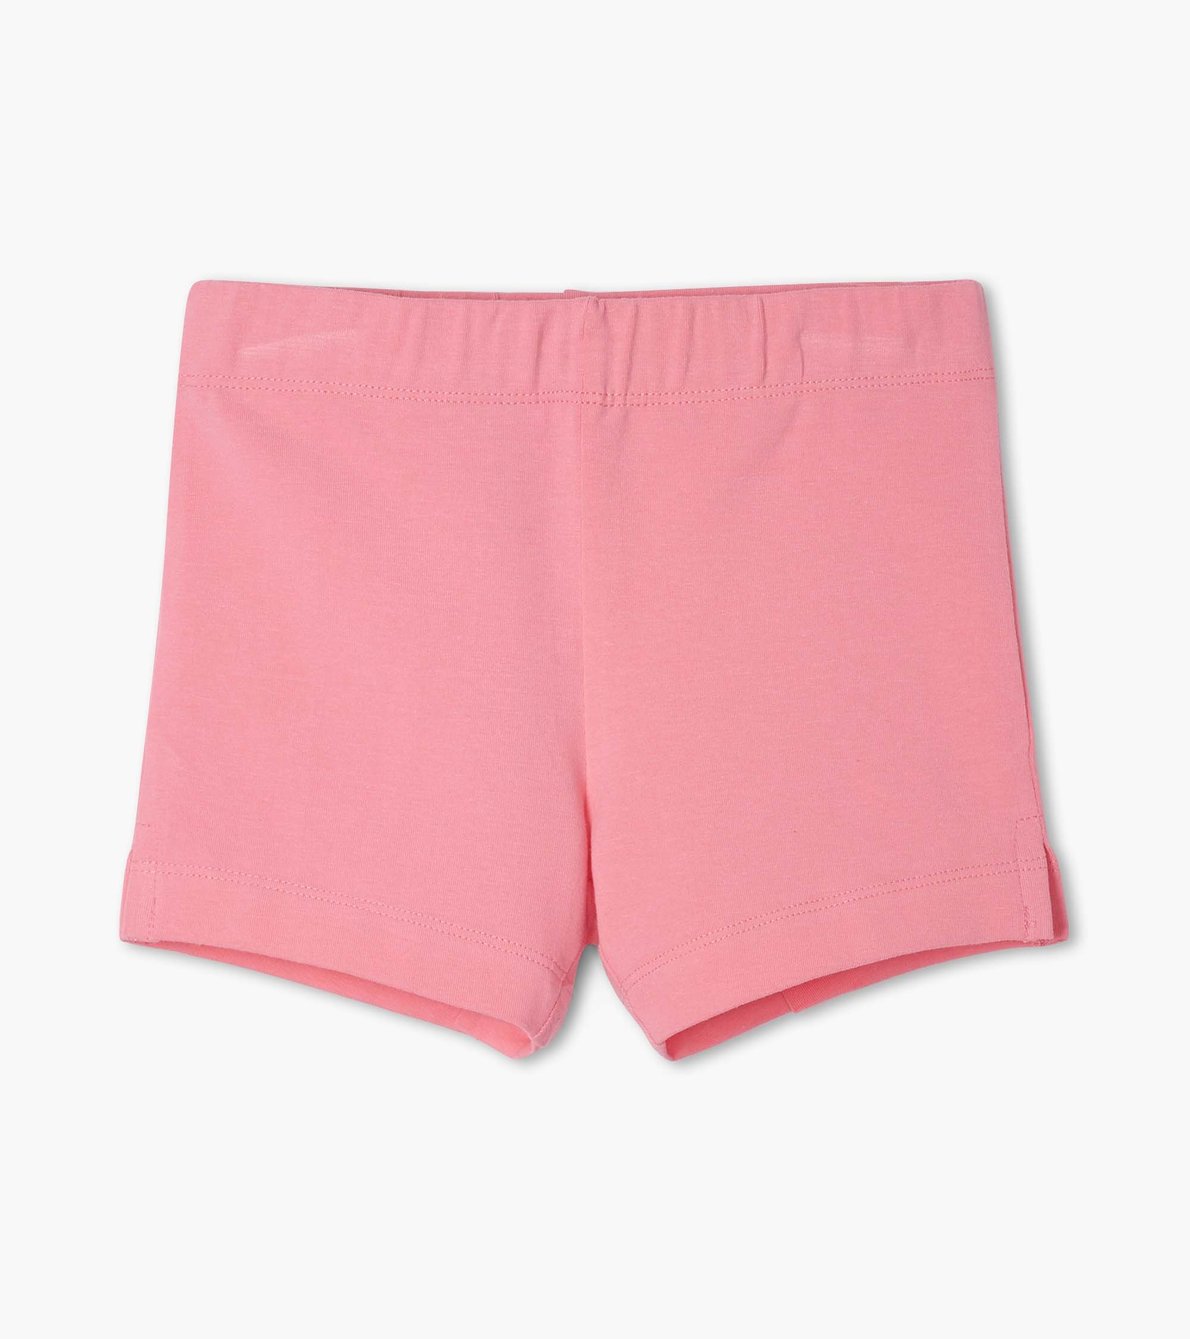 View larger image of Light Pink Bicycle Shorts